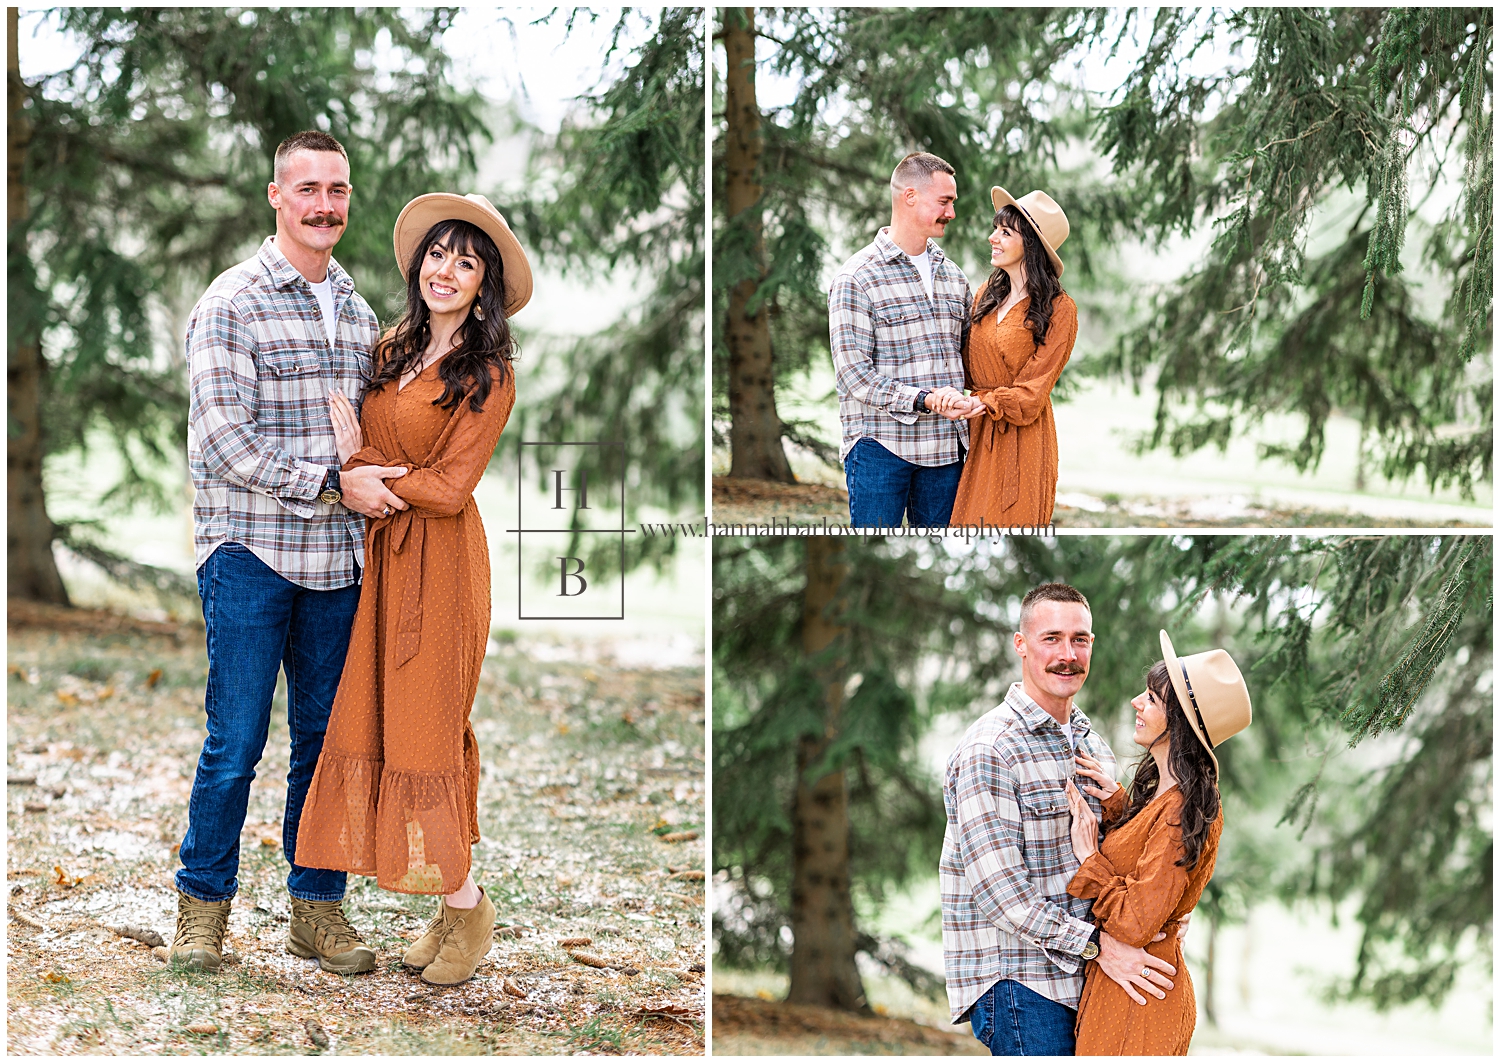 Lady in orange dress poses with fiance in pine forest.